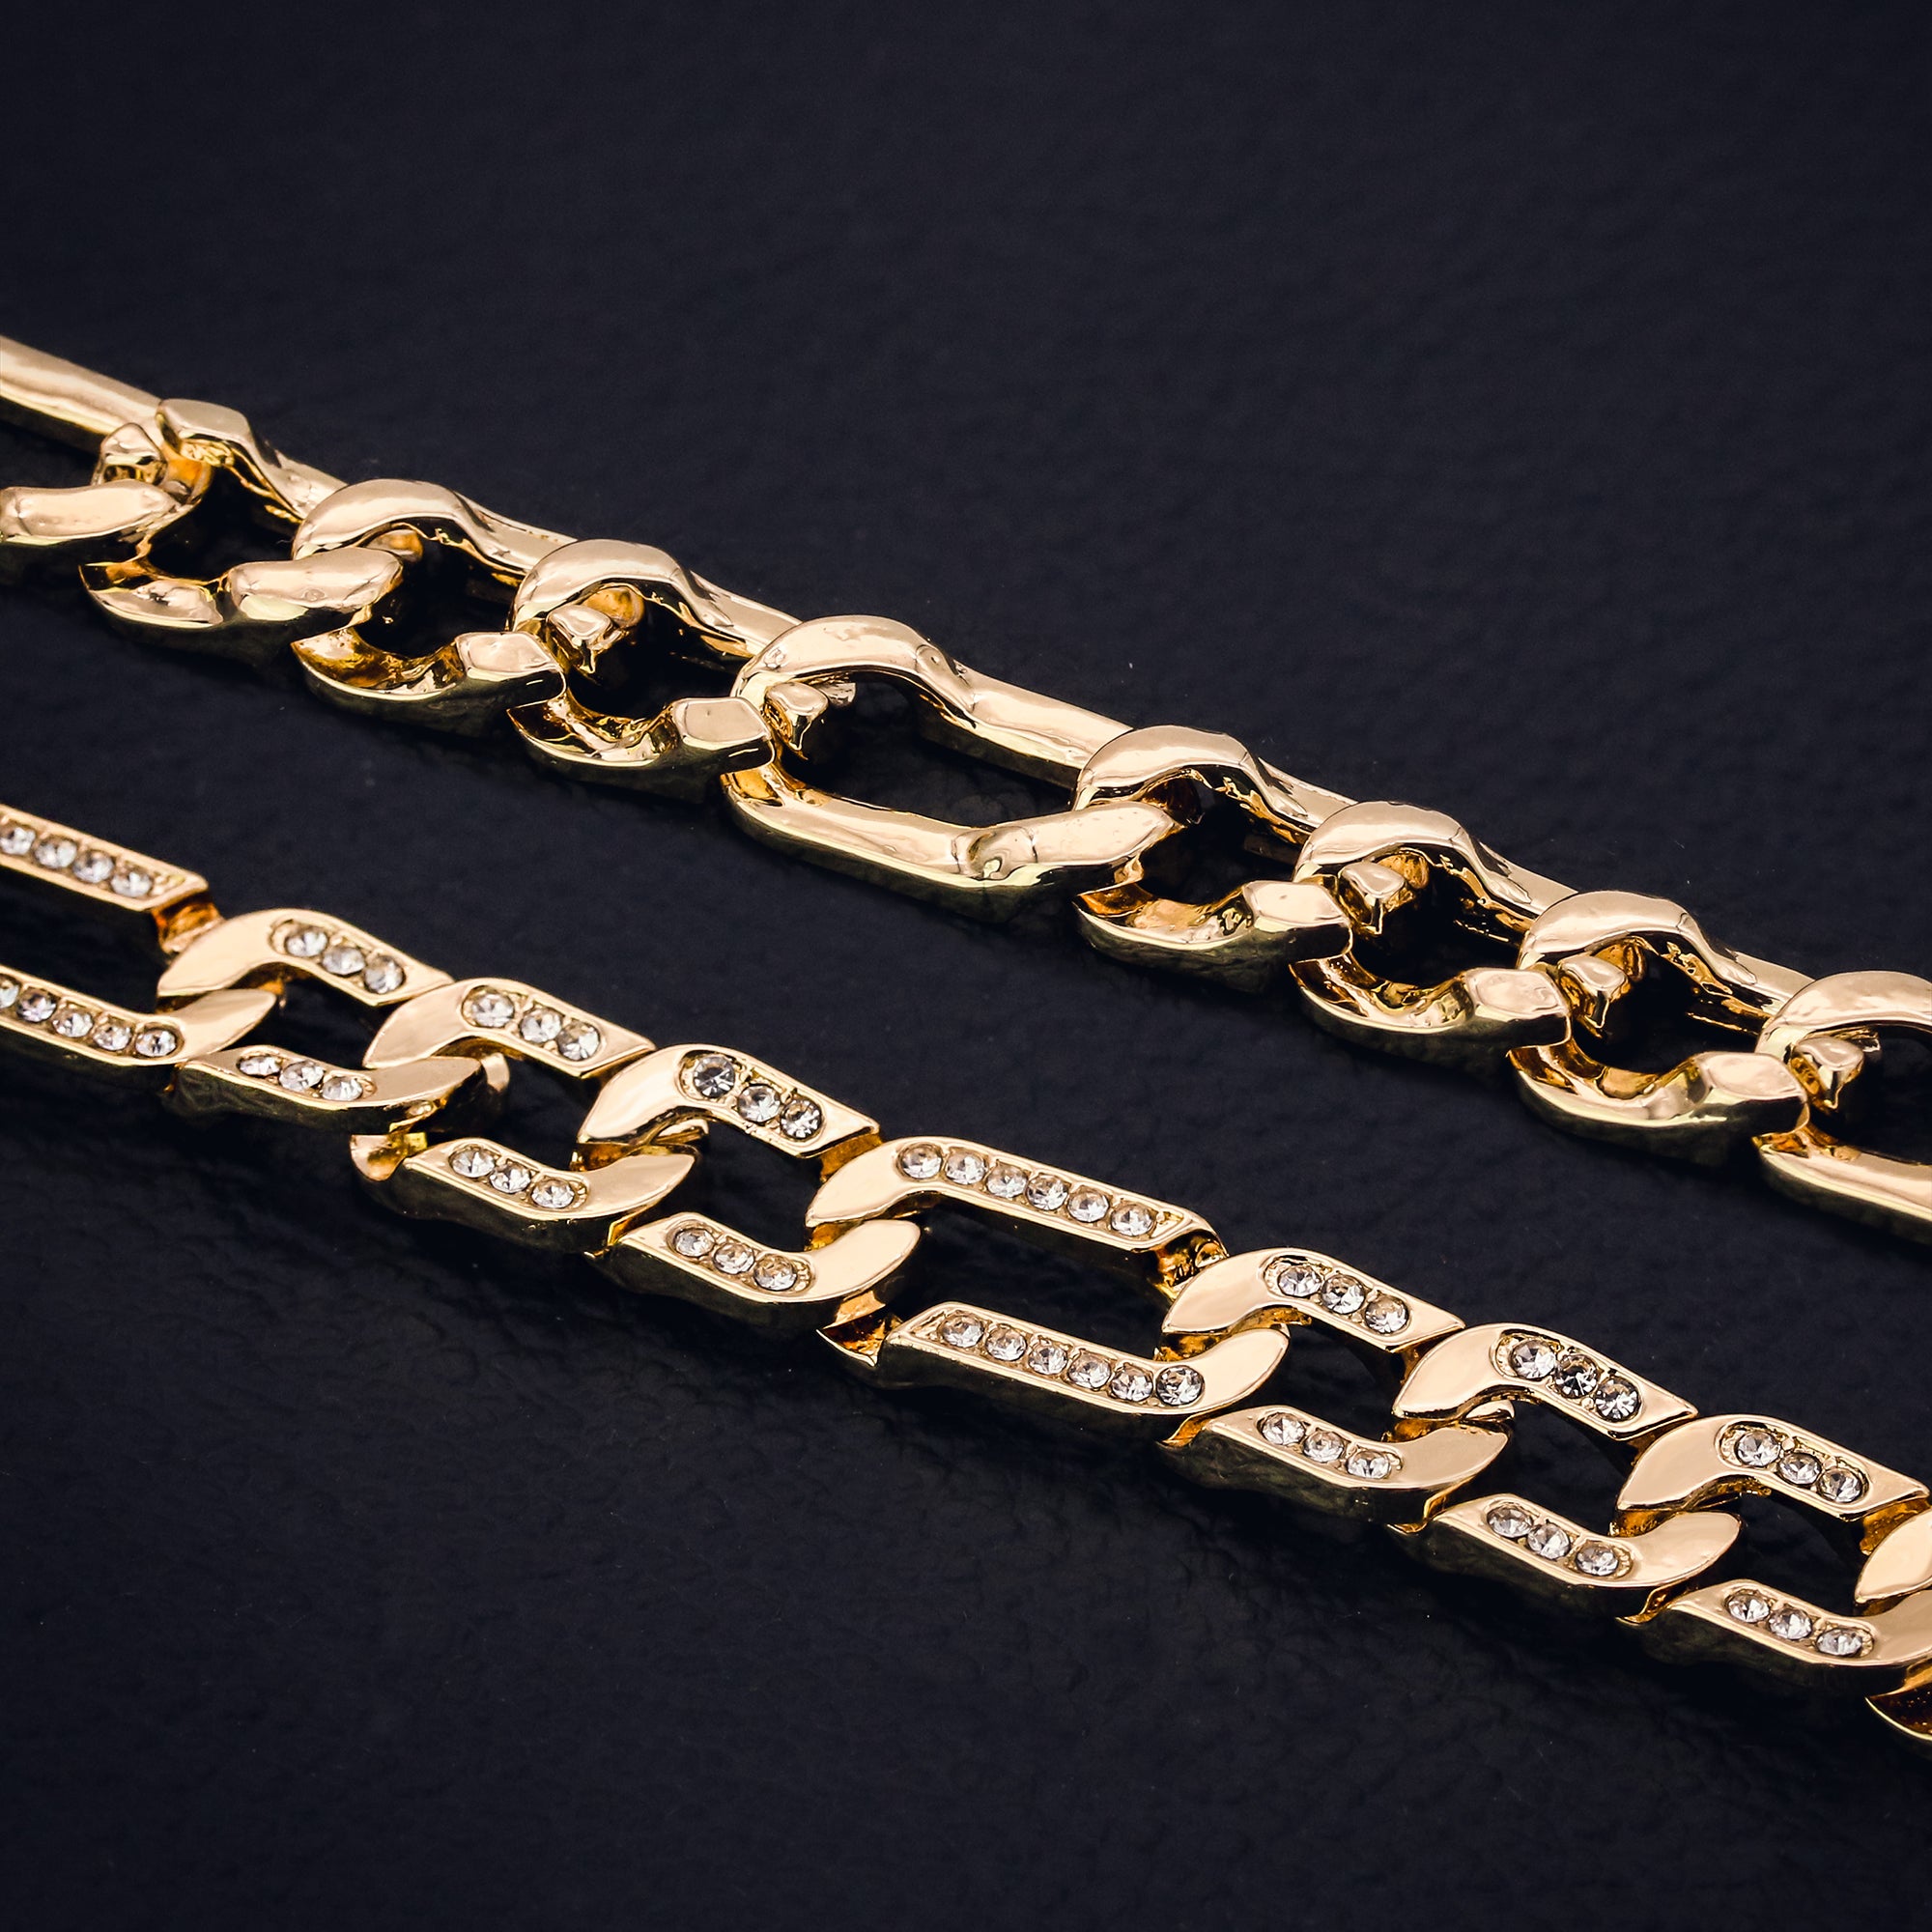 Figaro Bracelet Link Fully Iced 14k Gold Plated 9" Box Clasp